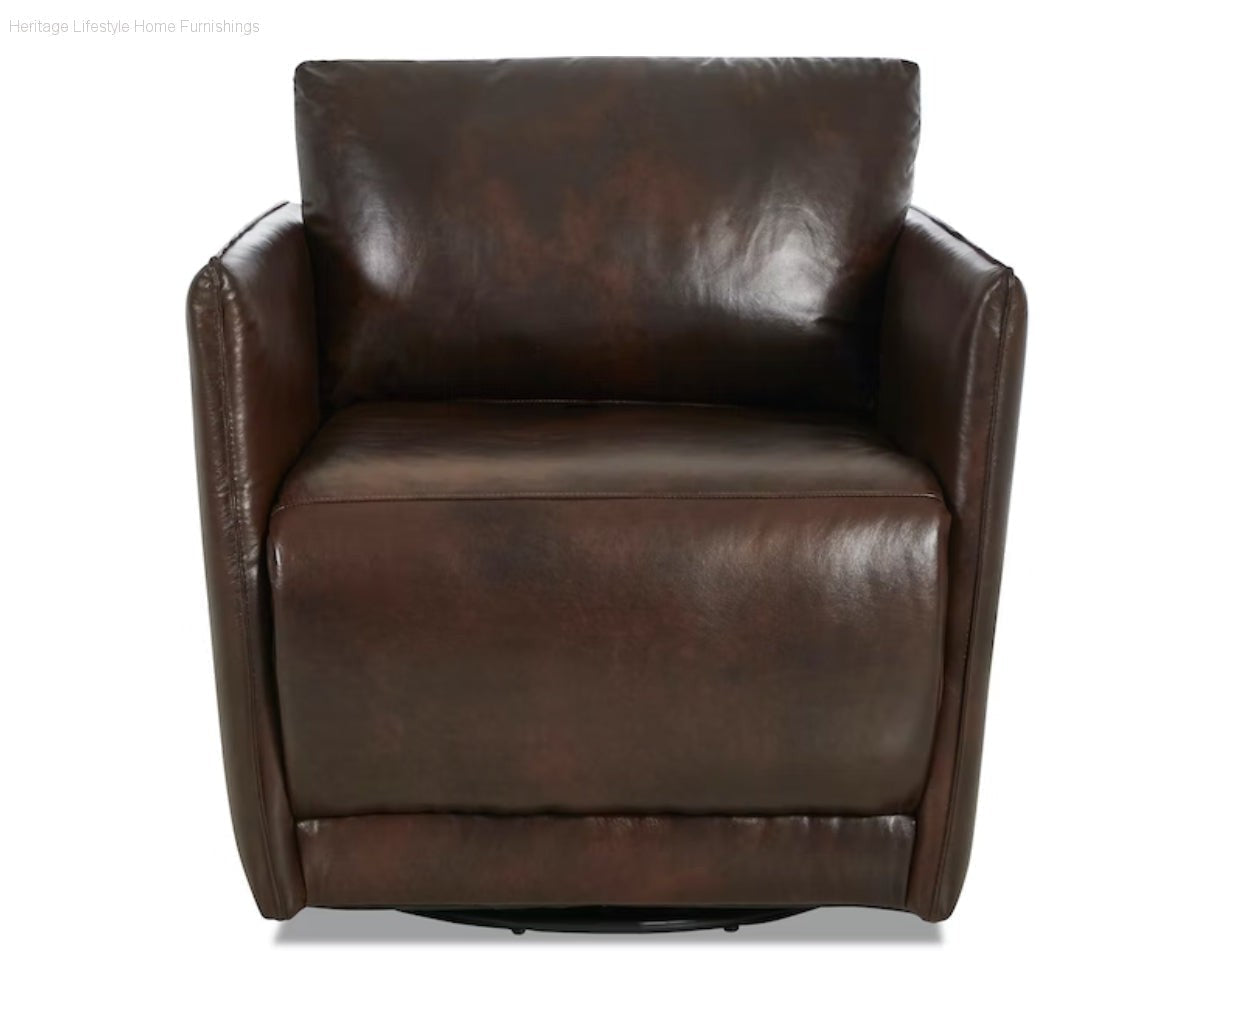 Accent Chair - Elon Leather Swivel Chair